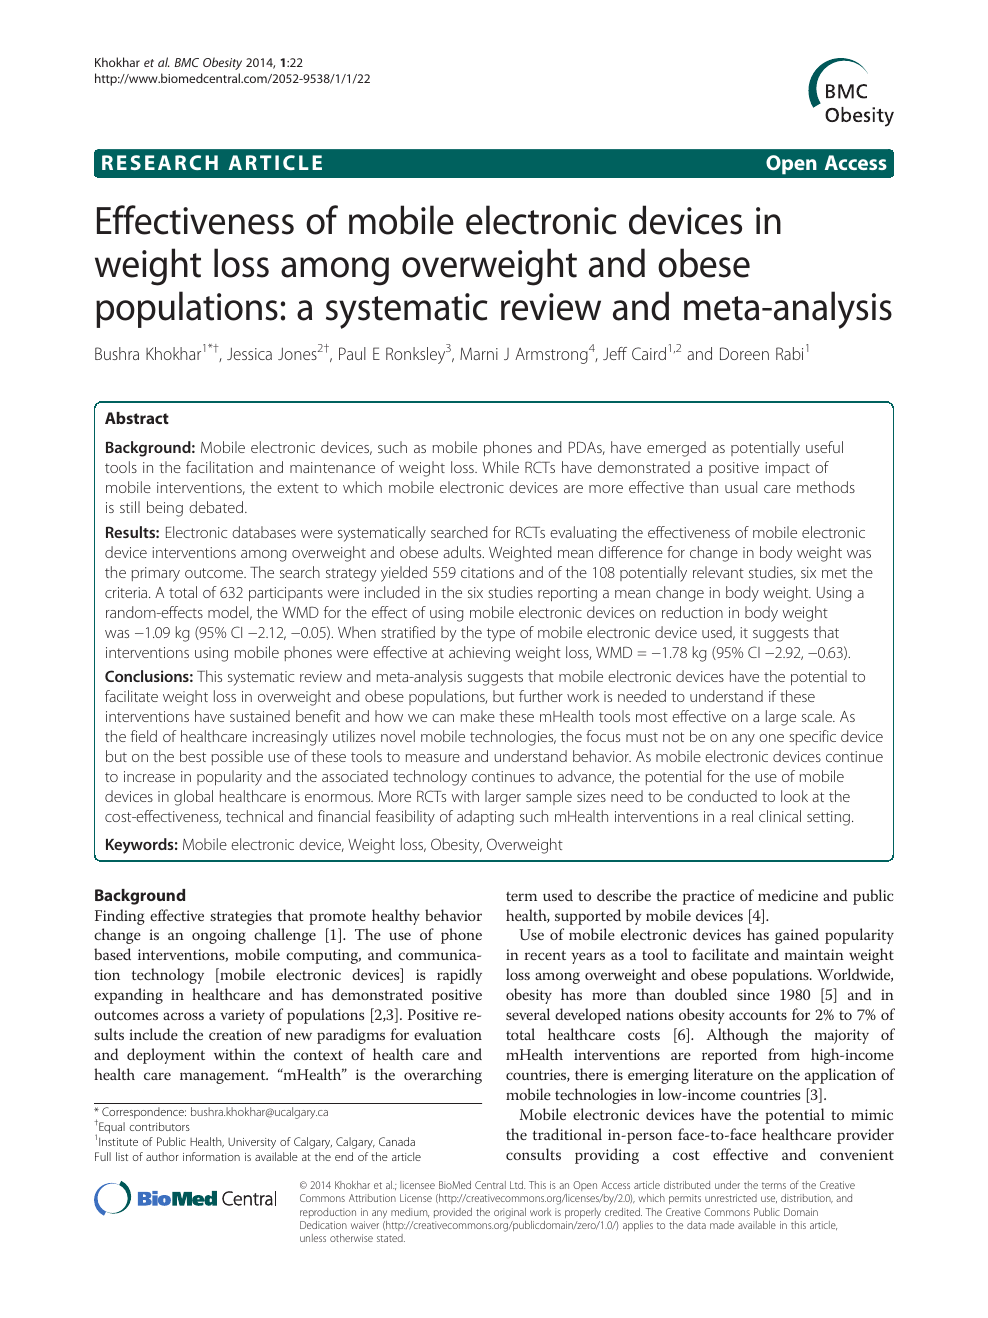 Effectiveness Of Mobile Electronic Devices In Weight Loss Among Overweight And Obese Populations A Systematic Review And Meta Analysis Topic Of Research Paper In Medical Engineering Download Scholarly Article Pdf And Read